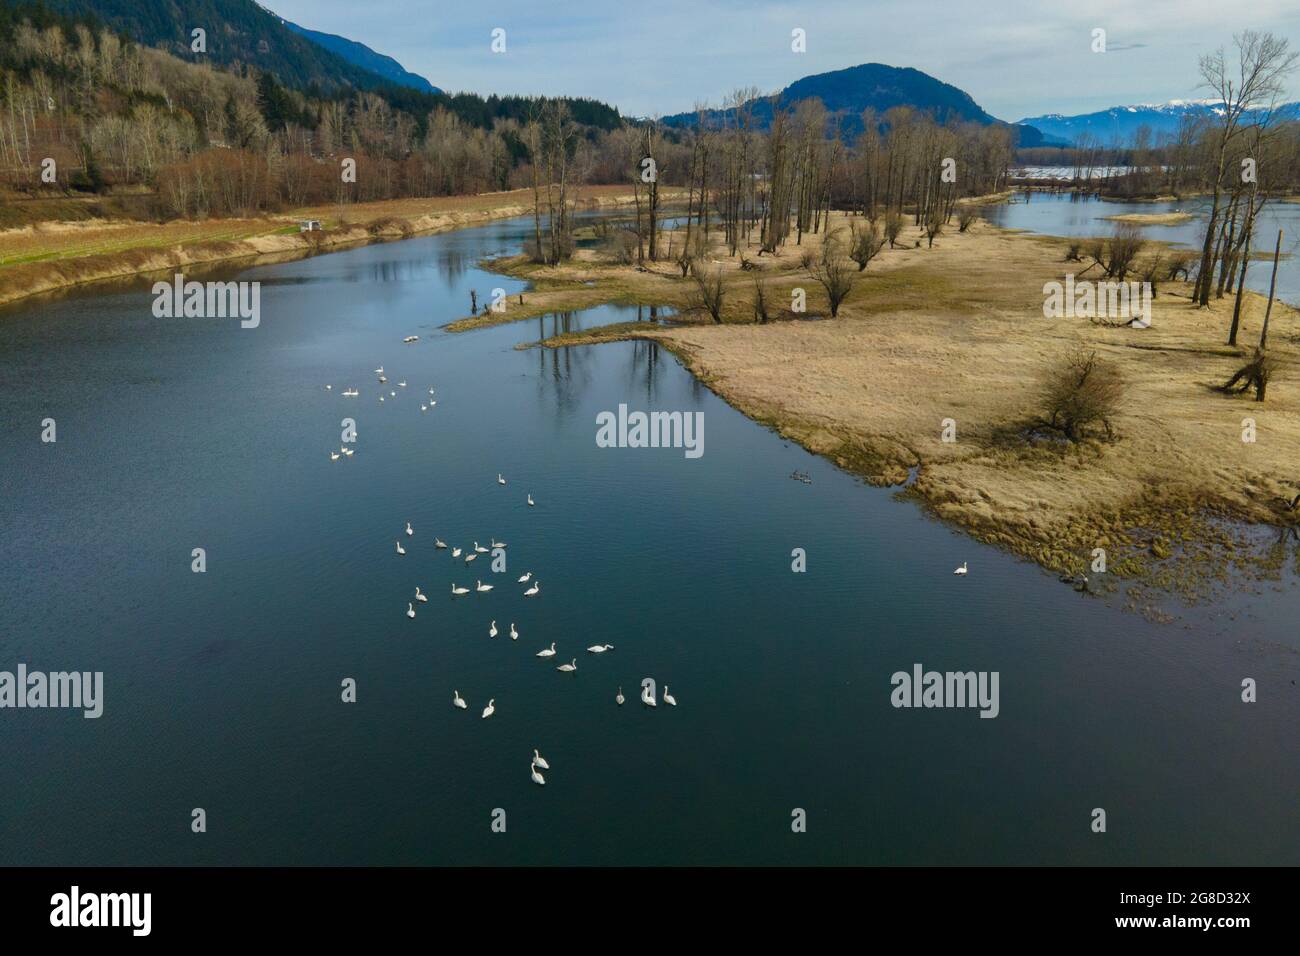 Nicomen Slough by the village of Deroche in the lower Fraser River Valley with a flock of Trumpeter Swans resting in the water. Stock Photo